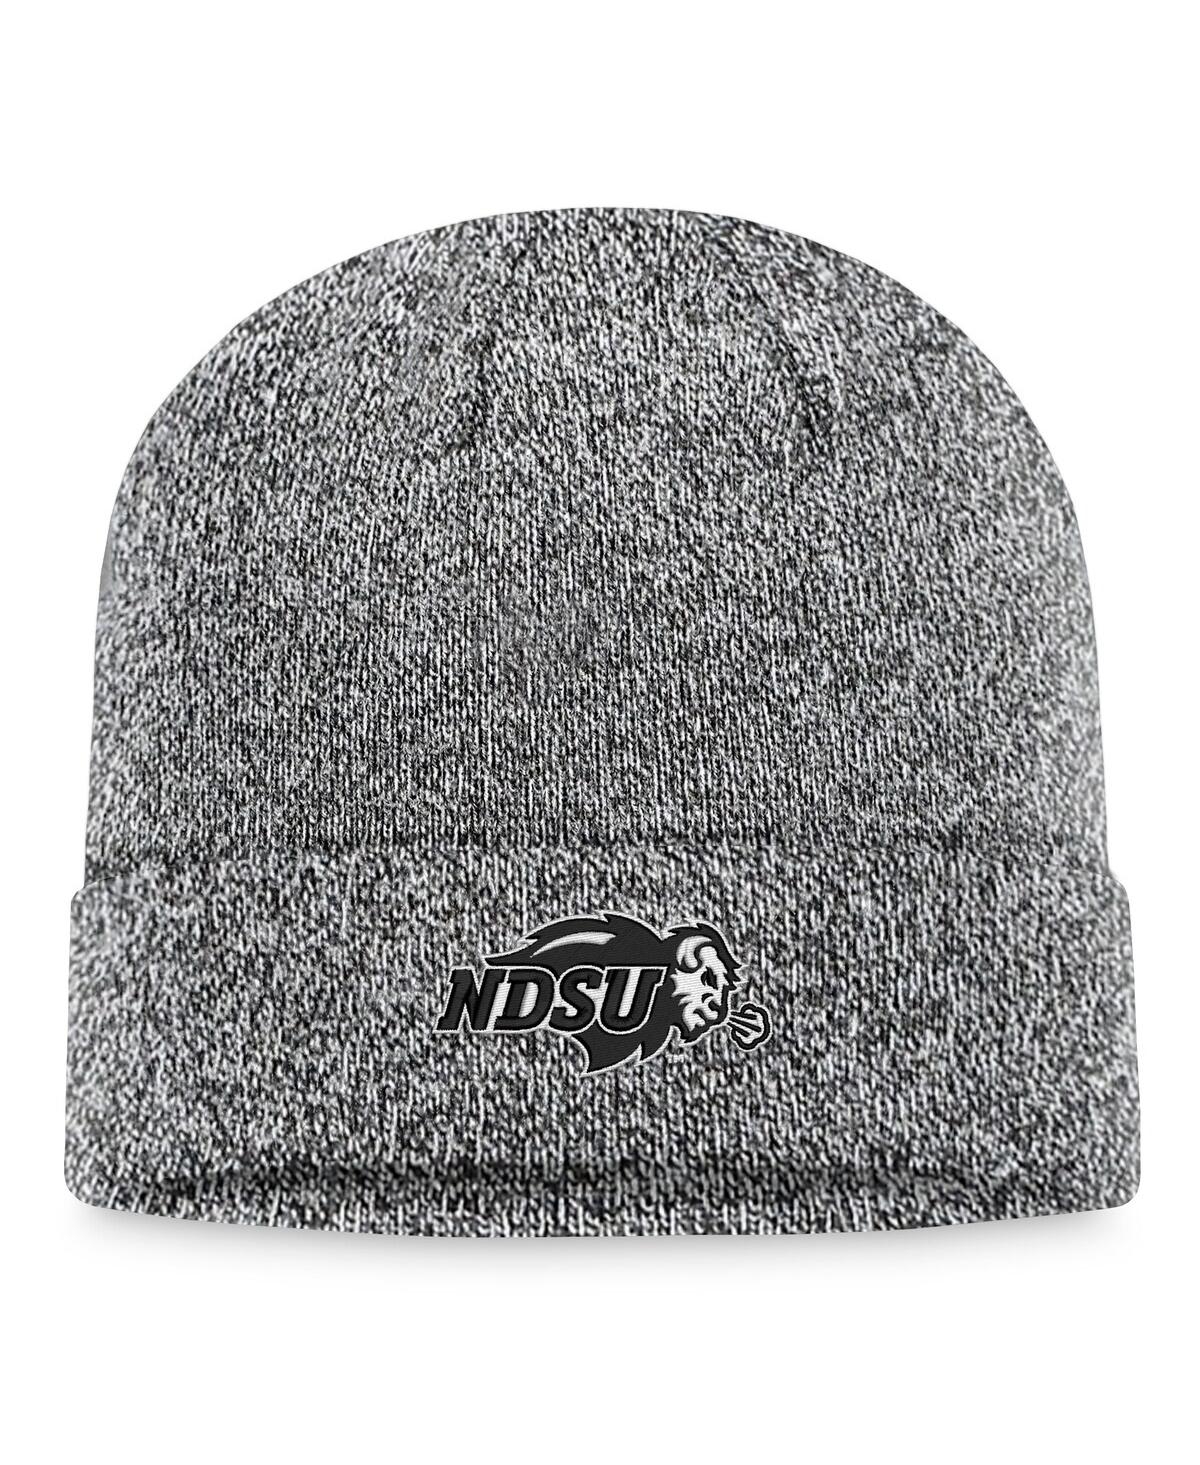 Top Of The World Men's  Heather Black Ndsu Bison Cuffed Knit Hat